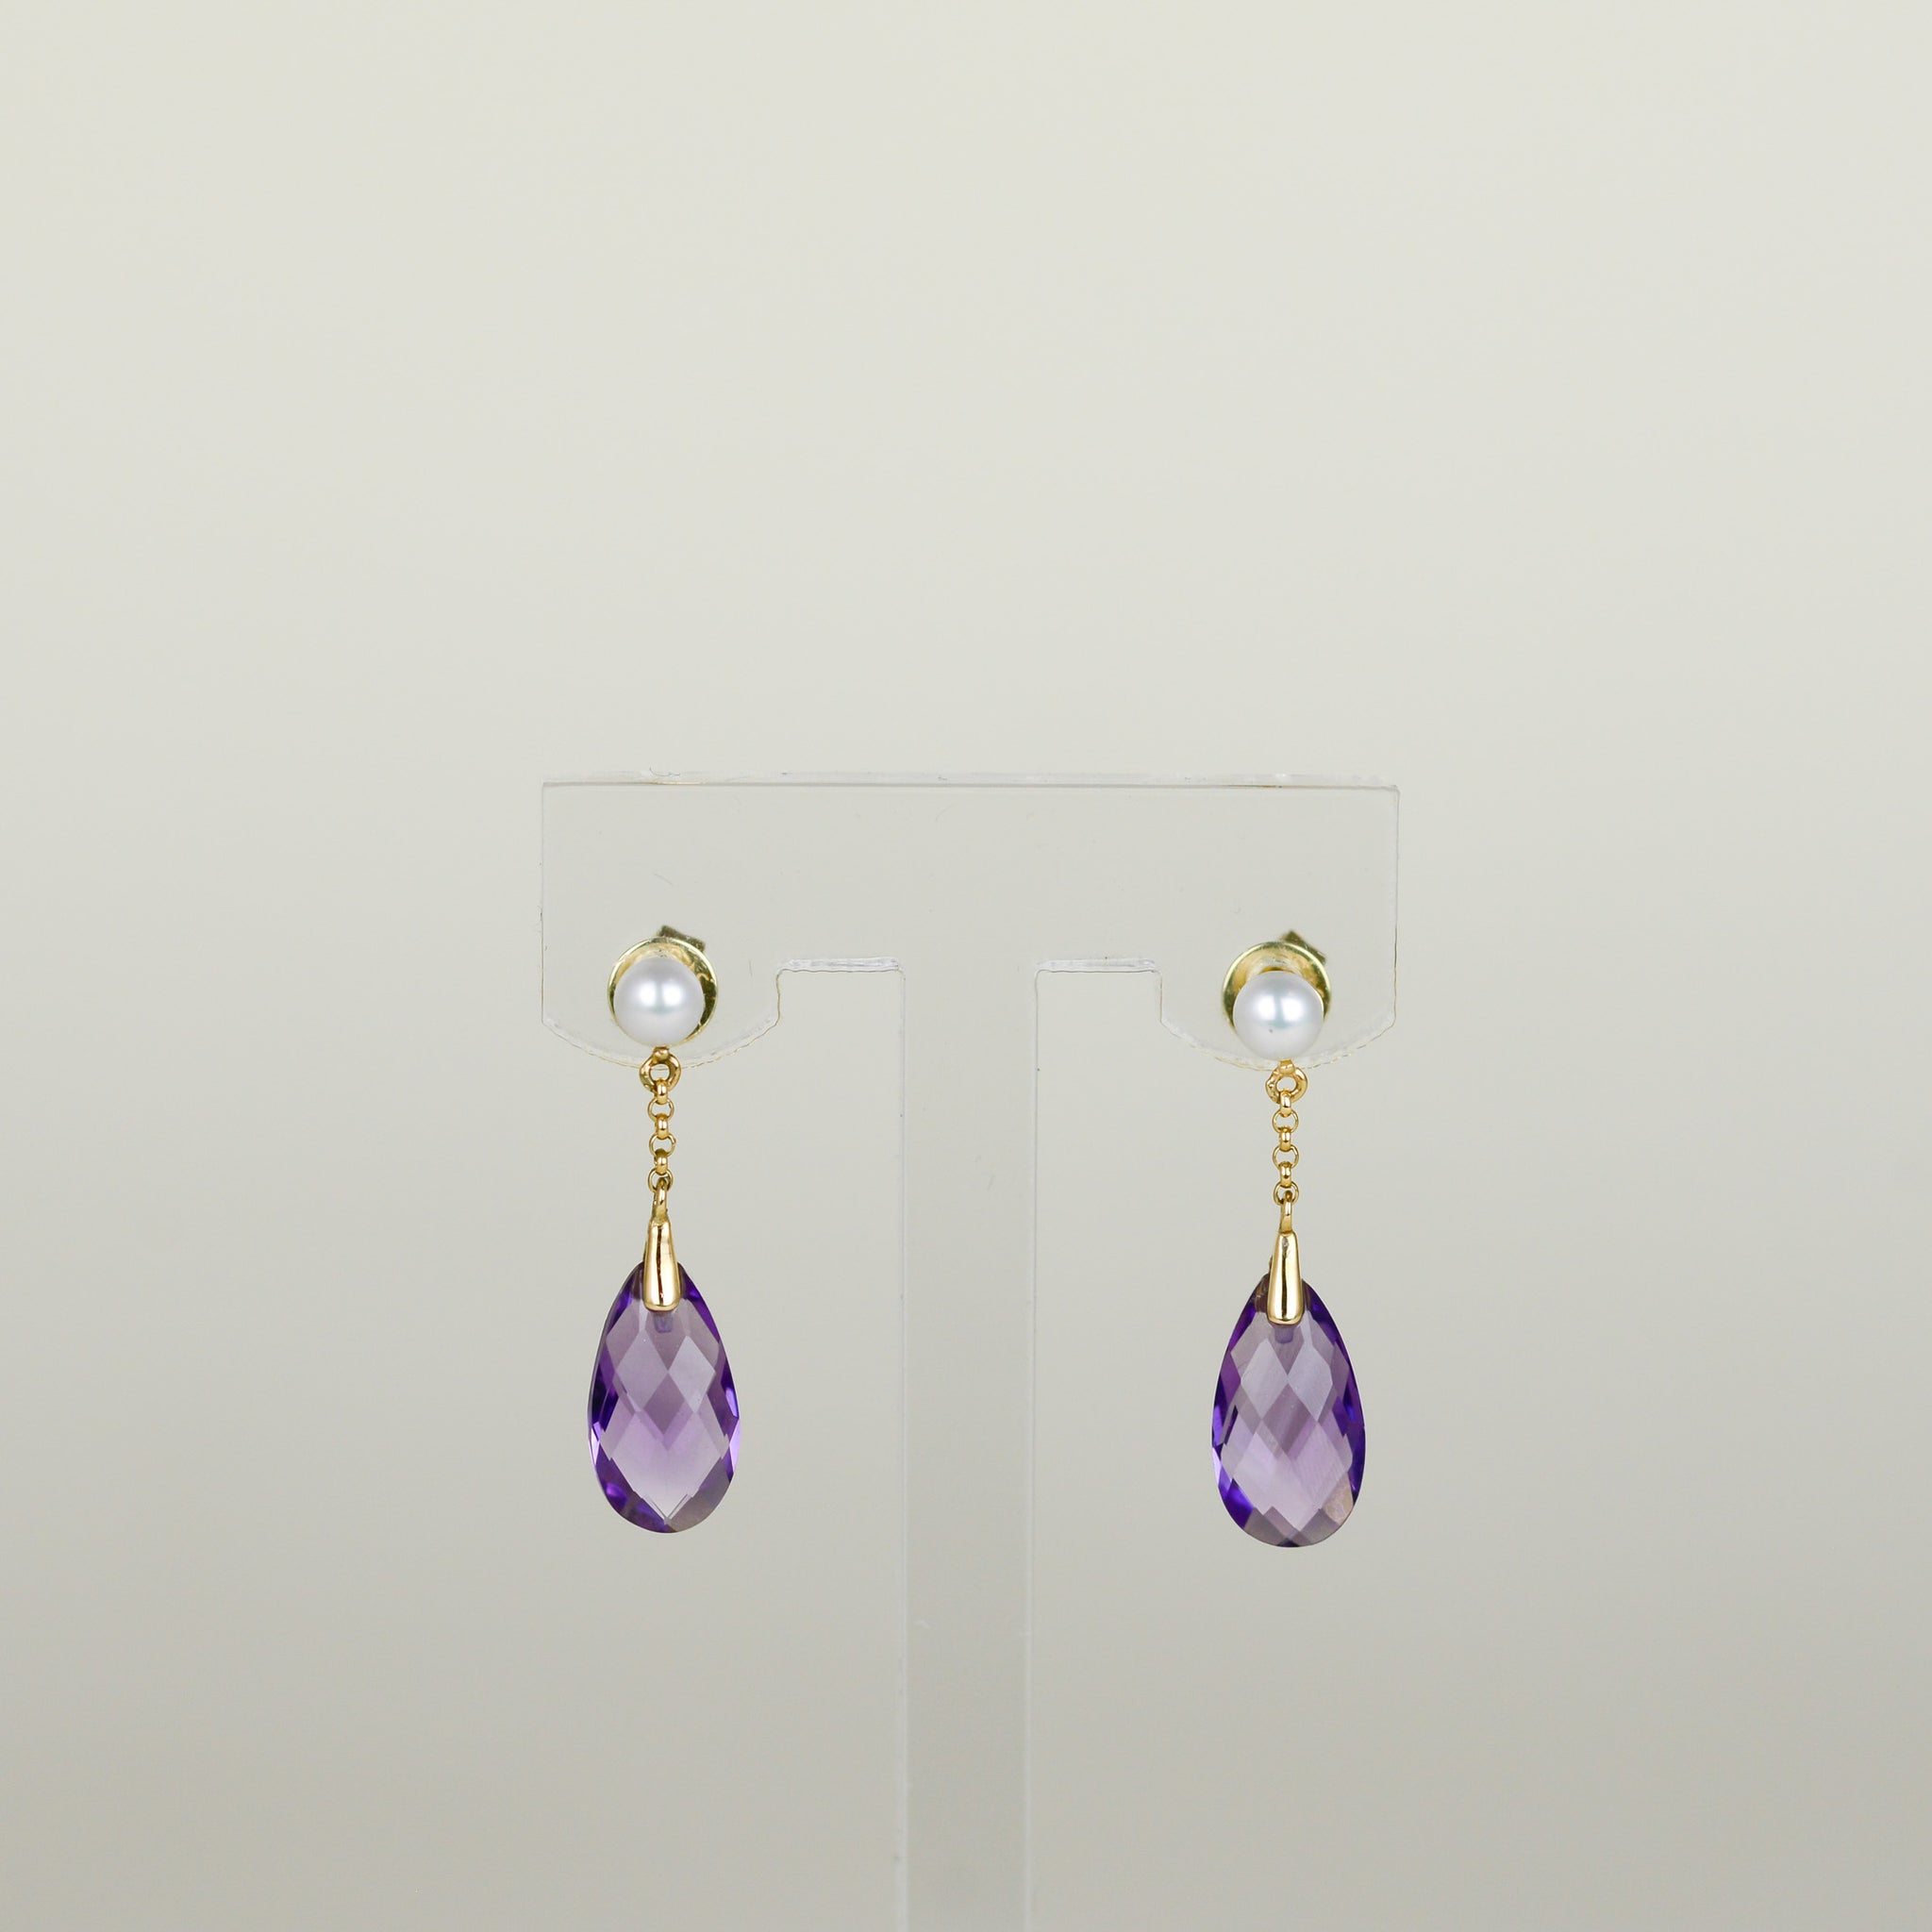 9ct Yellow Gold 3.22ct Oval Briolette Amethyst and Pearl Drop Earrings